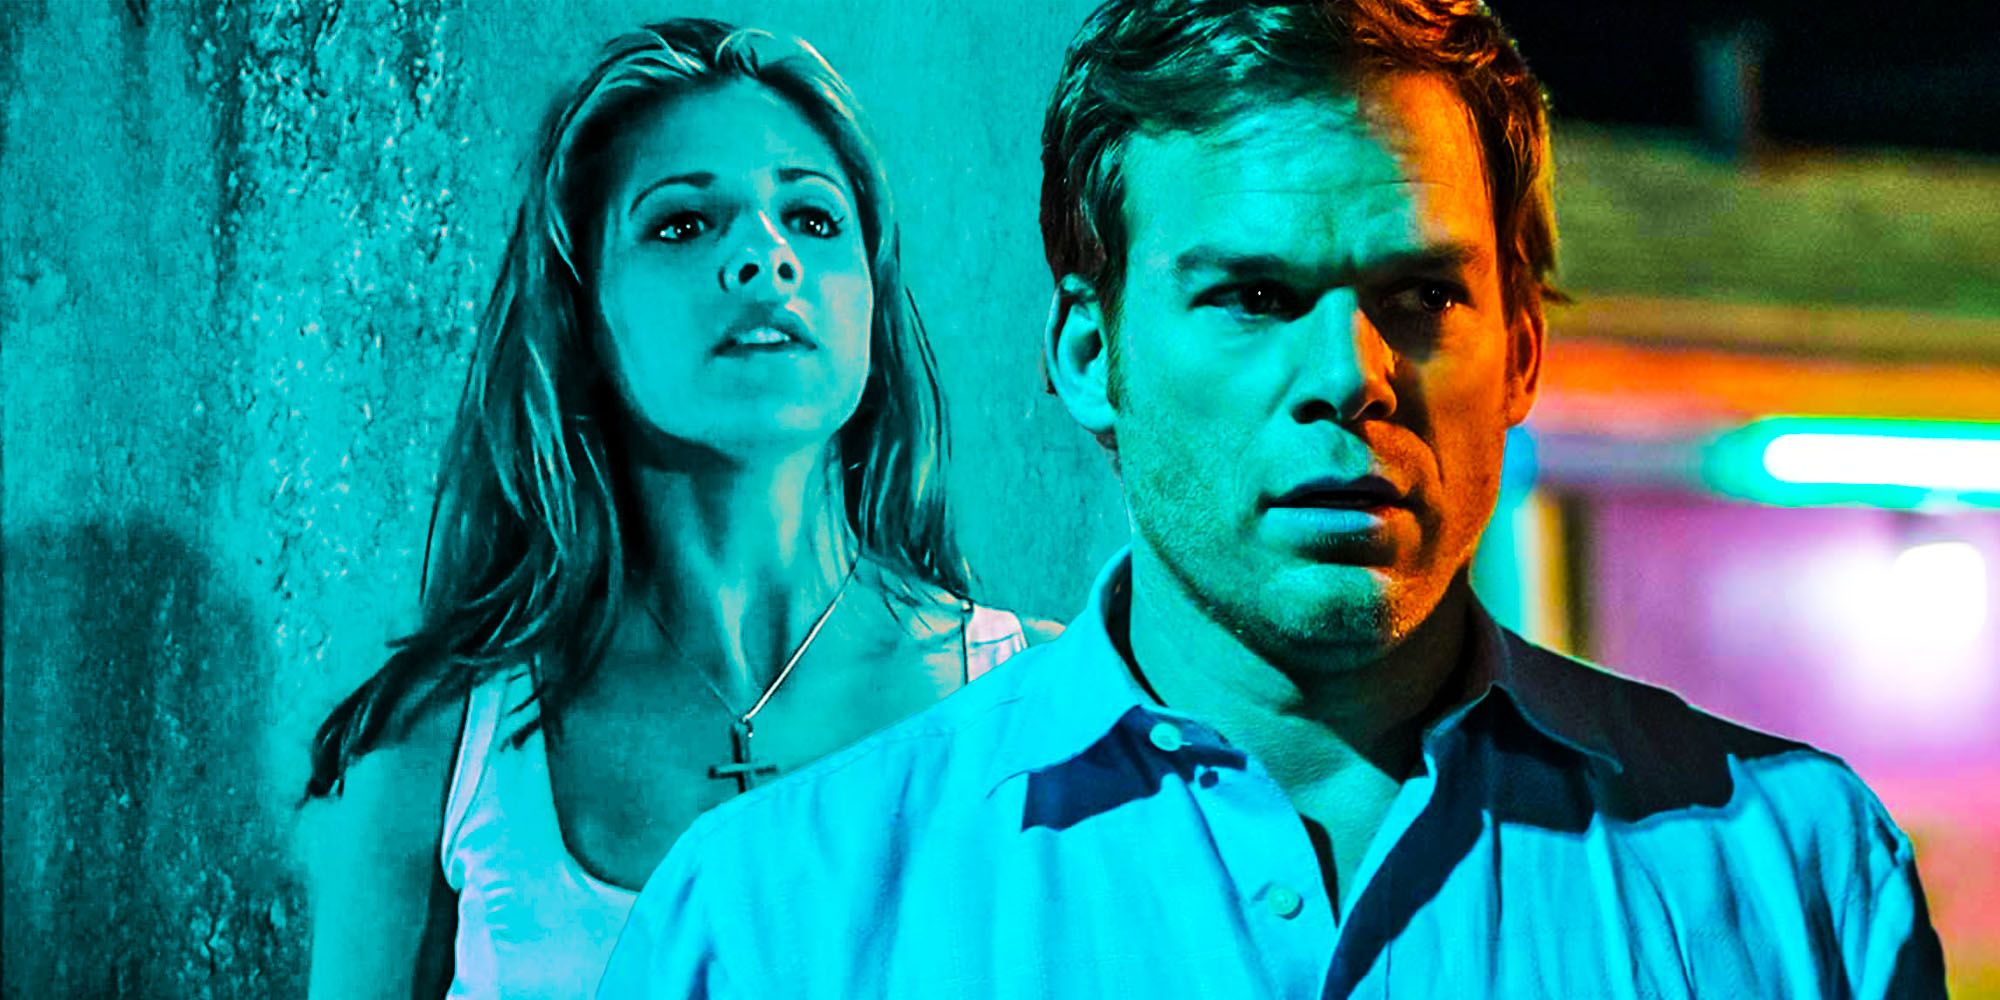 dexter and buffy the vampire slayer in the same universe